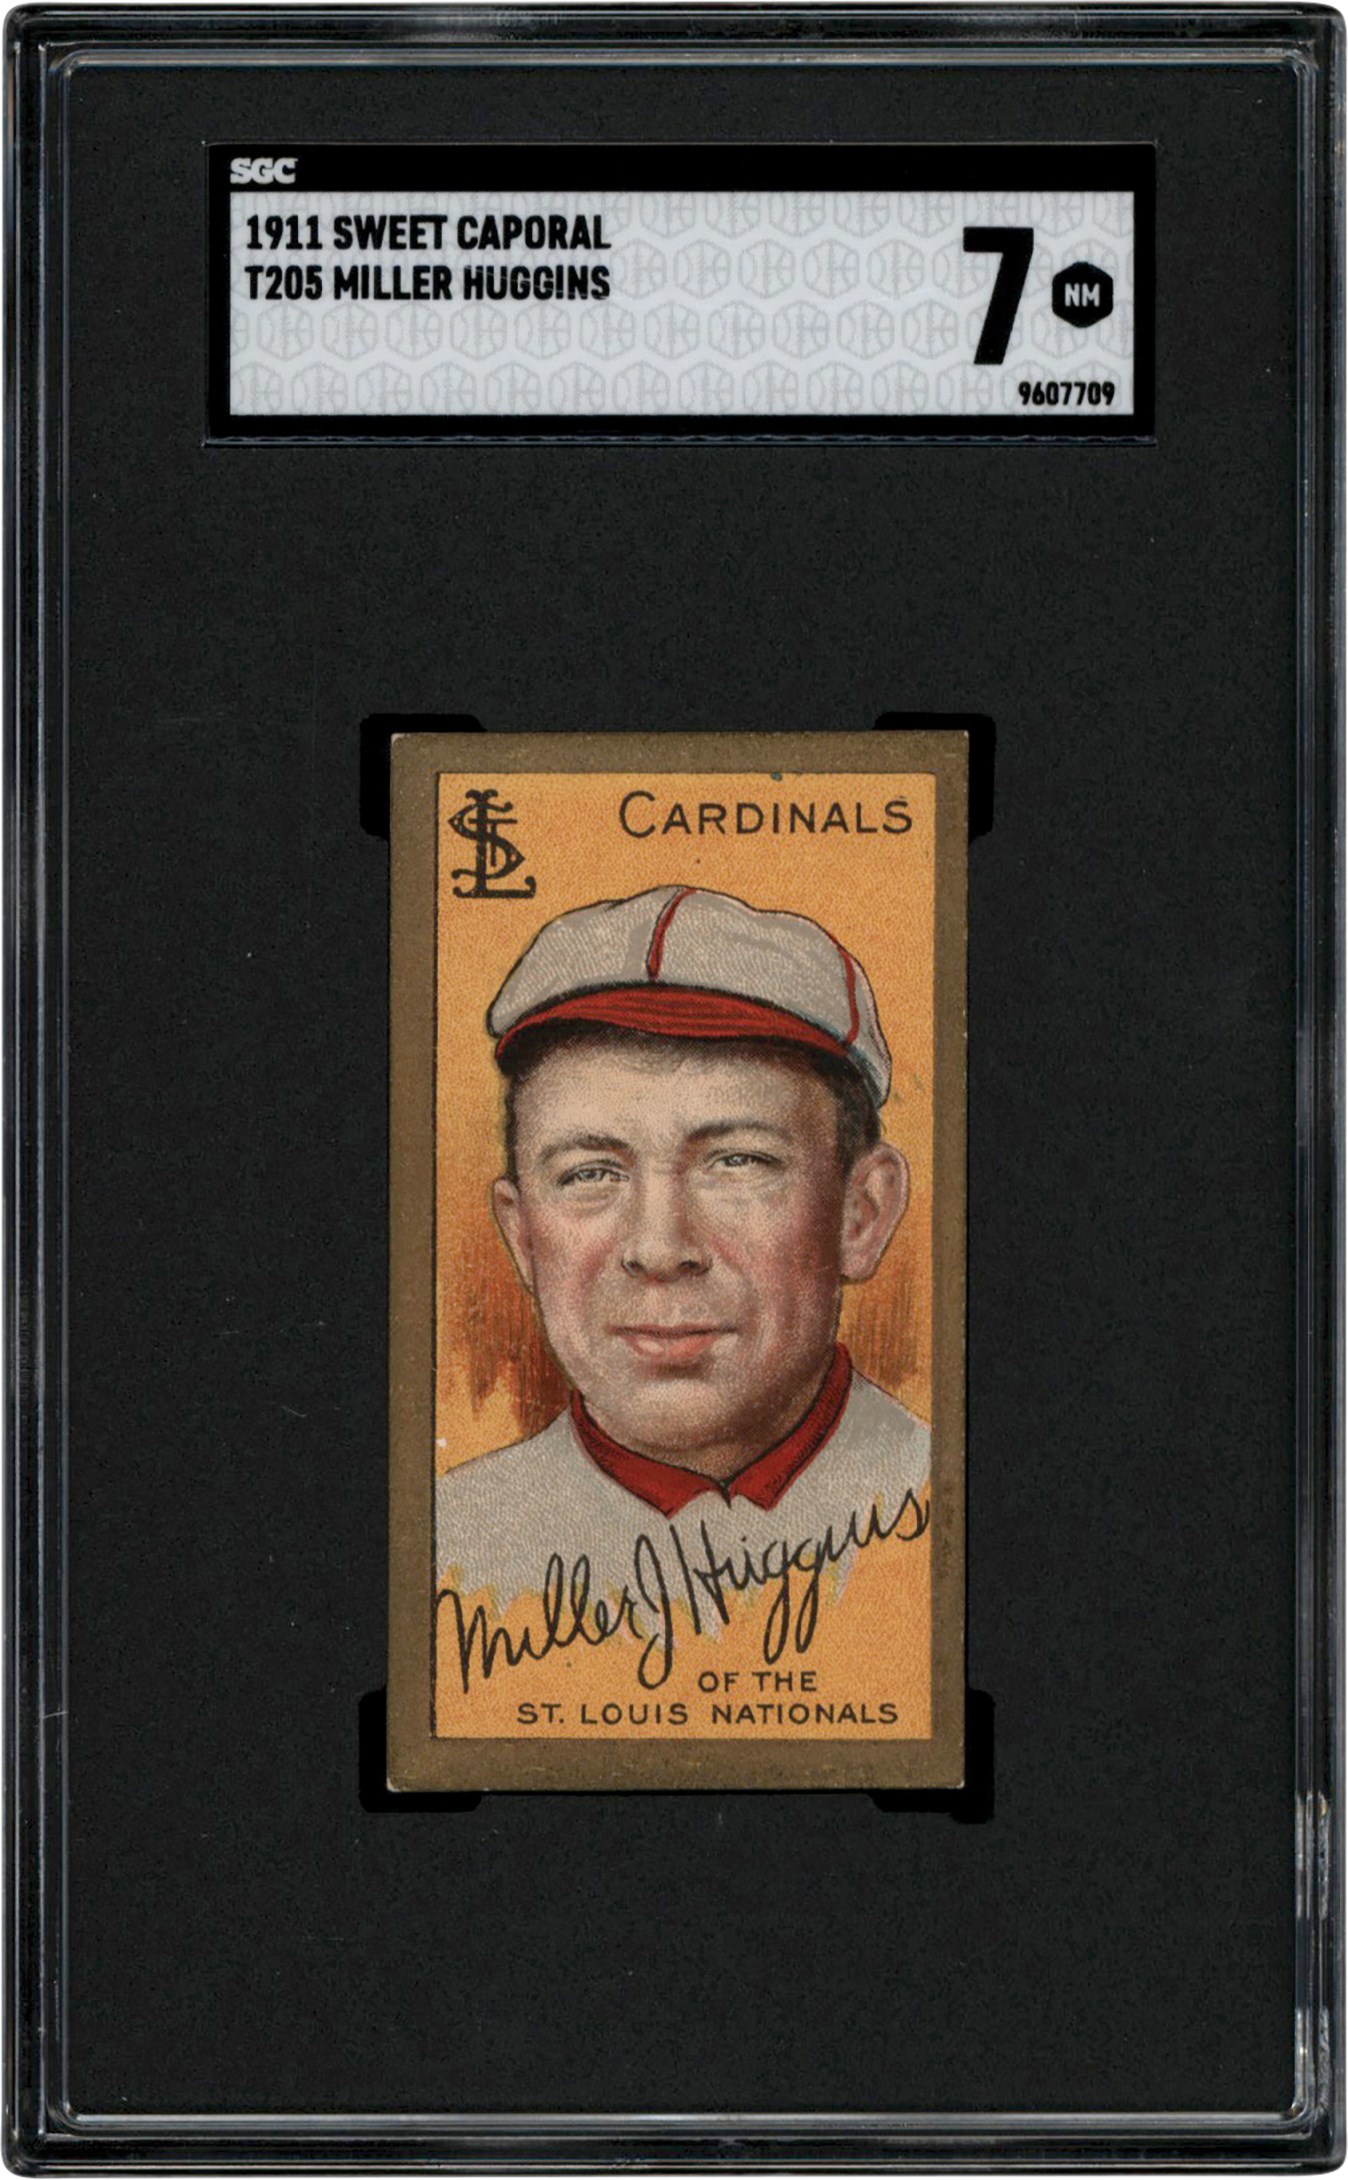 - 911 T205 Miller Huggins Sweet Caporal SGC NM 7 (Only Two Higher)